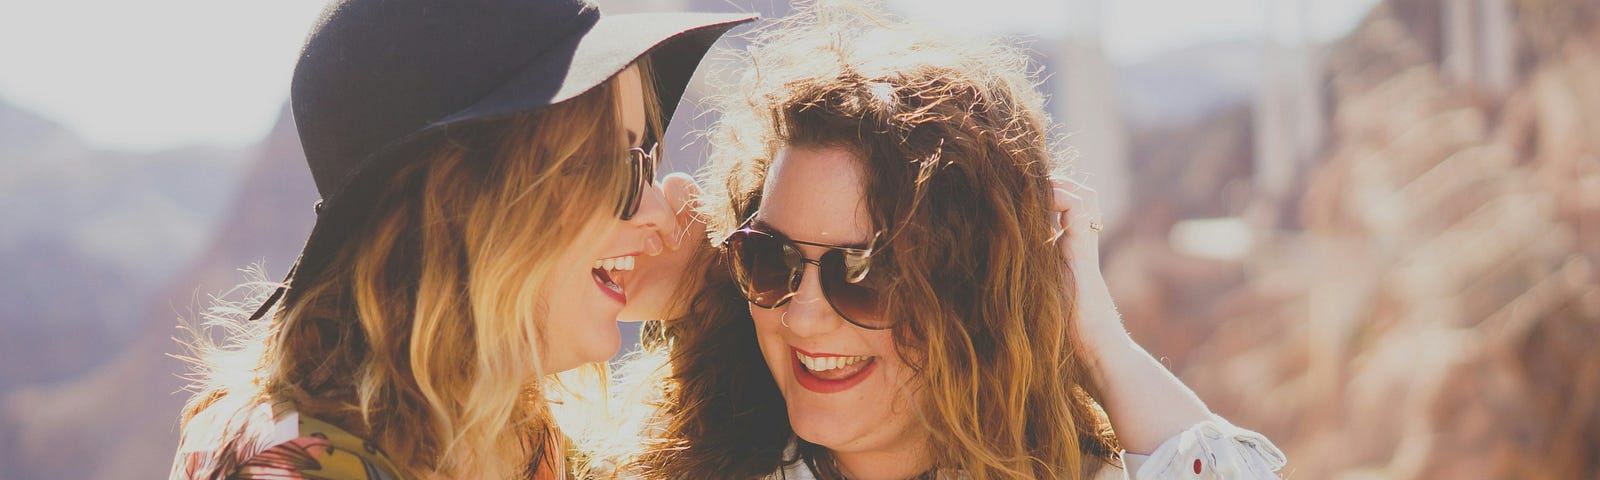 Two women one wearing a hat and the other leaning in and smiling to hear a secret.